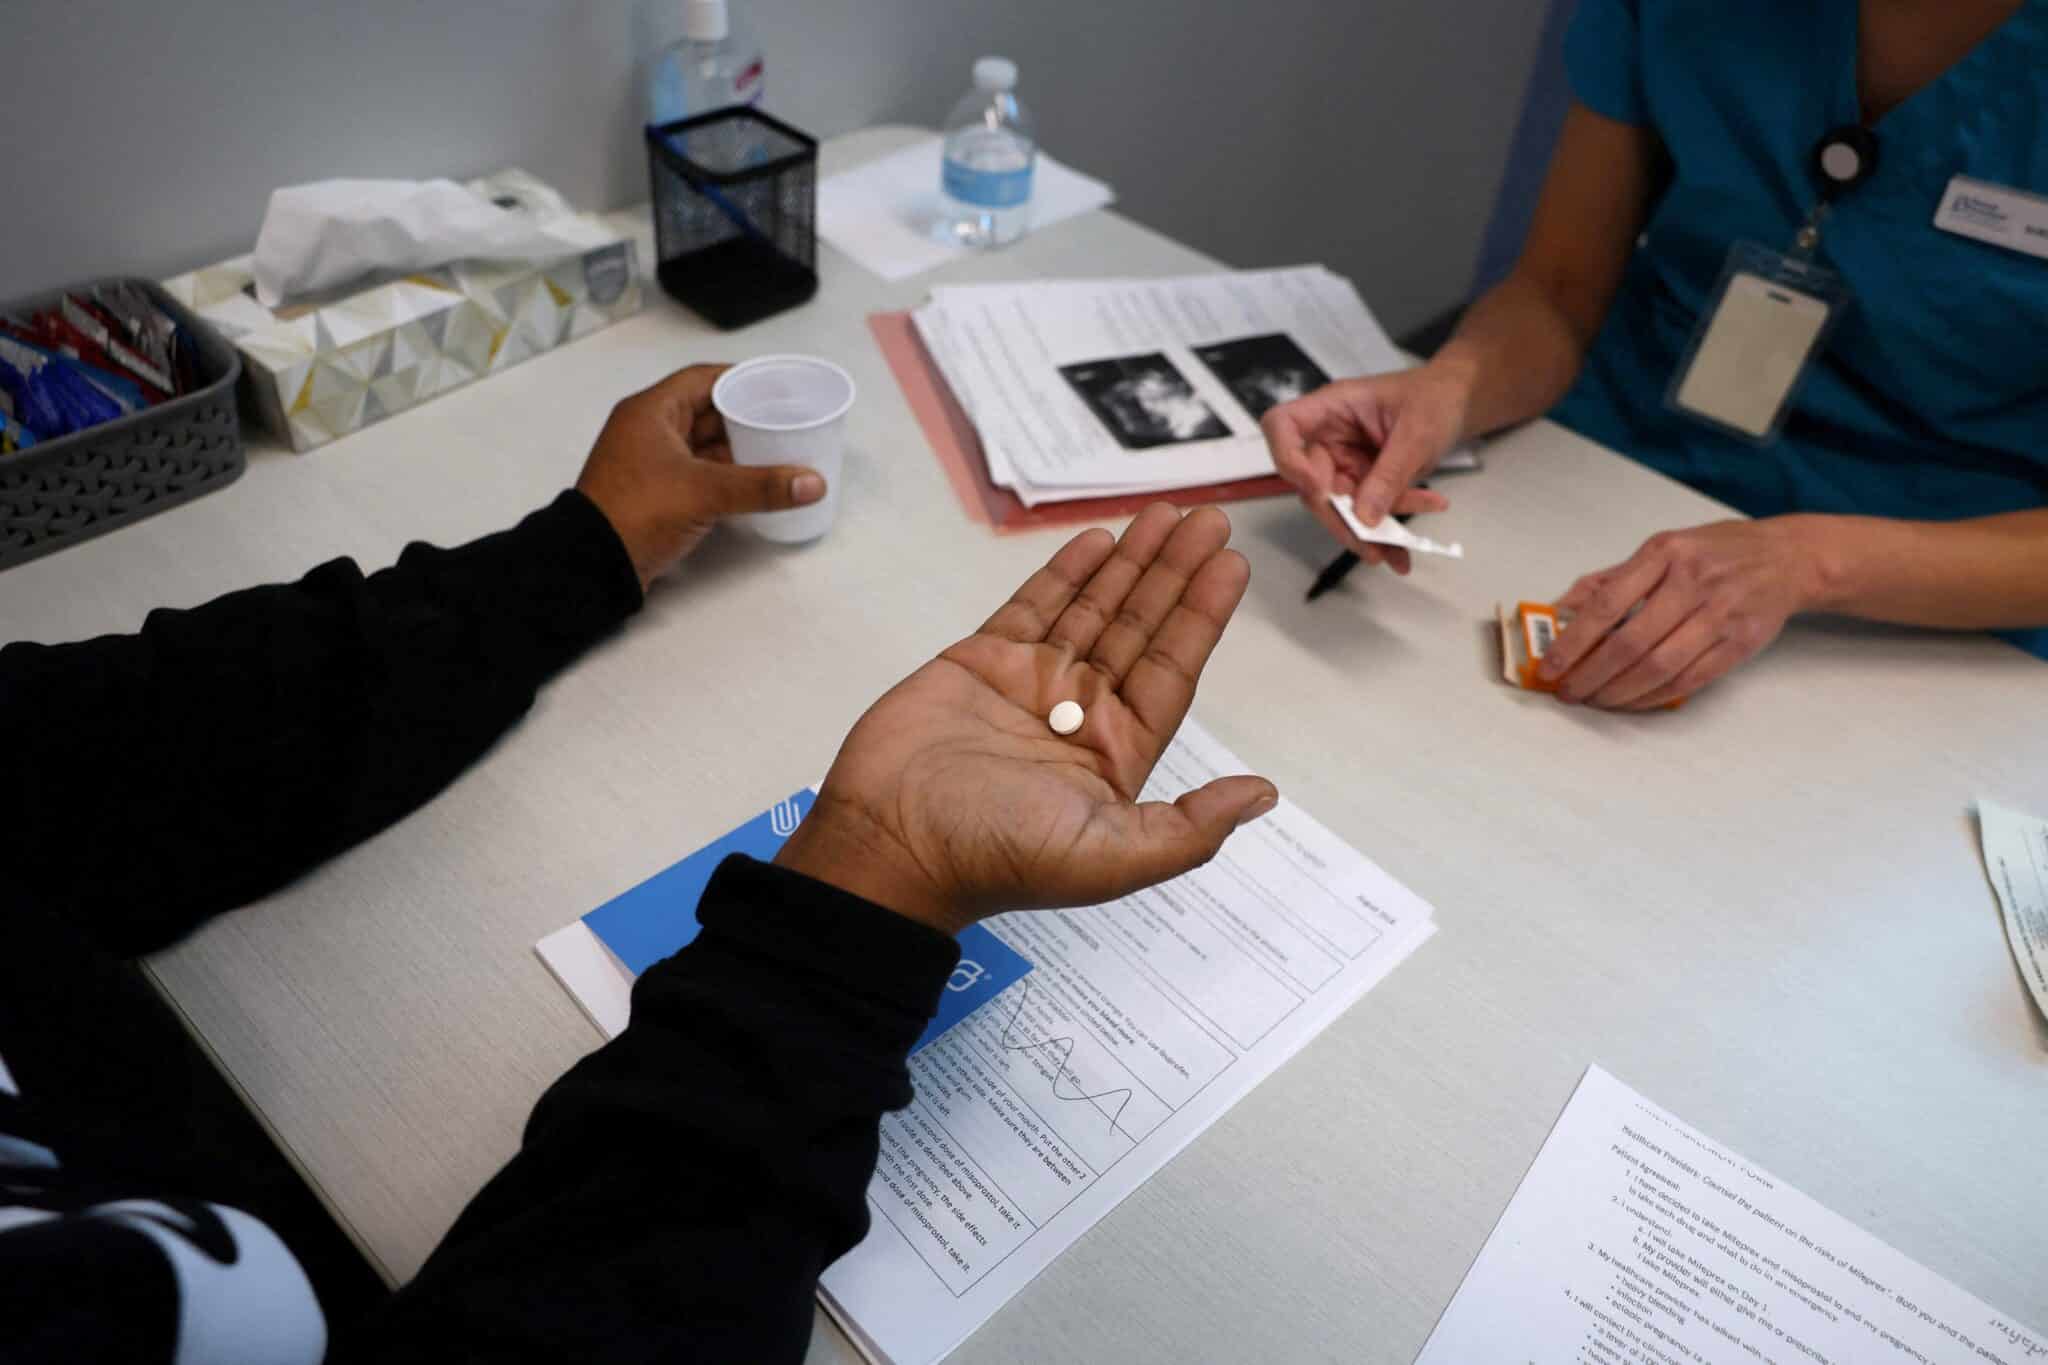 A doctor gives a patient medication to start a medical abortion at Planned Parenthood in Birmingham, Ala., March 14, 2022. An Alabama attorney general is the latest political leader to suggest prosecution for women having abortions. (OSV News photo/Evelyn Hockstein, Reuters)